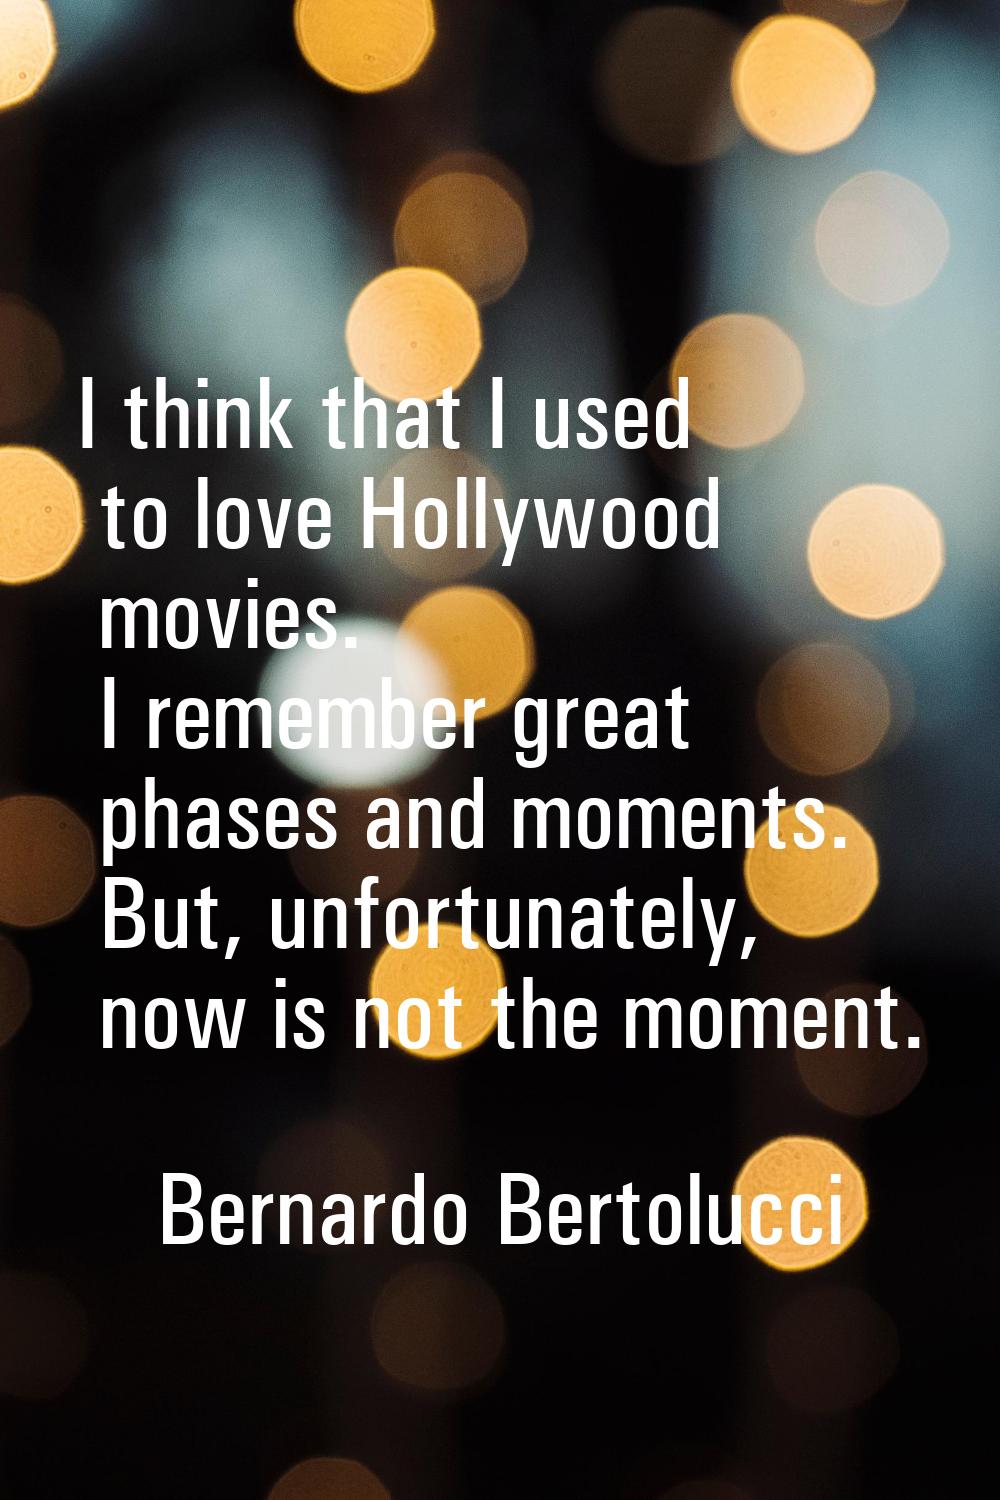 I think that I used to love Hollywood movies. I remember great phases and moments. But, unfortunate